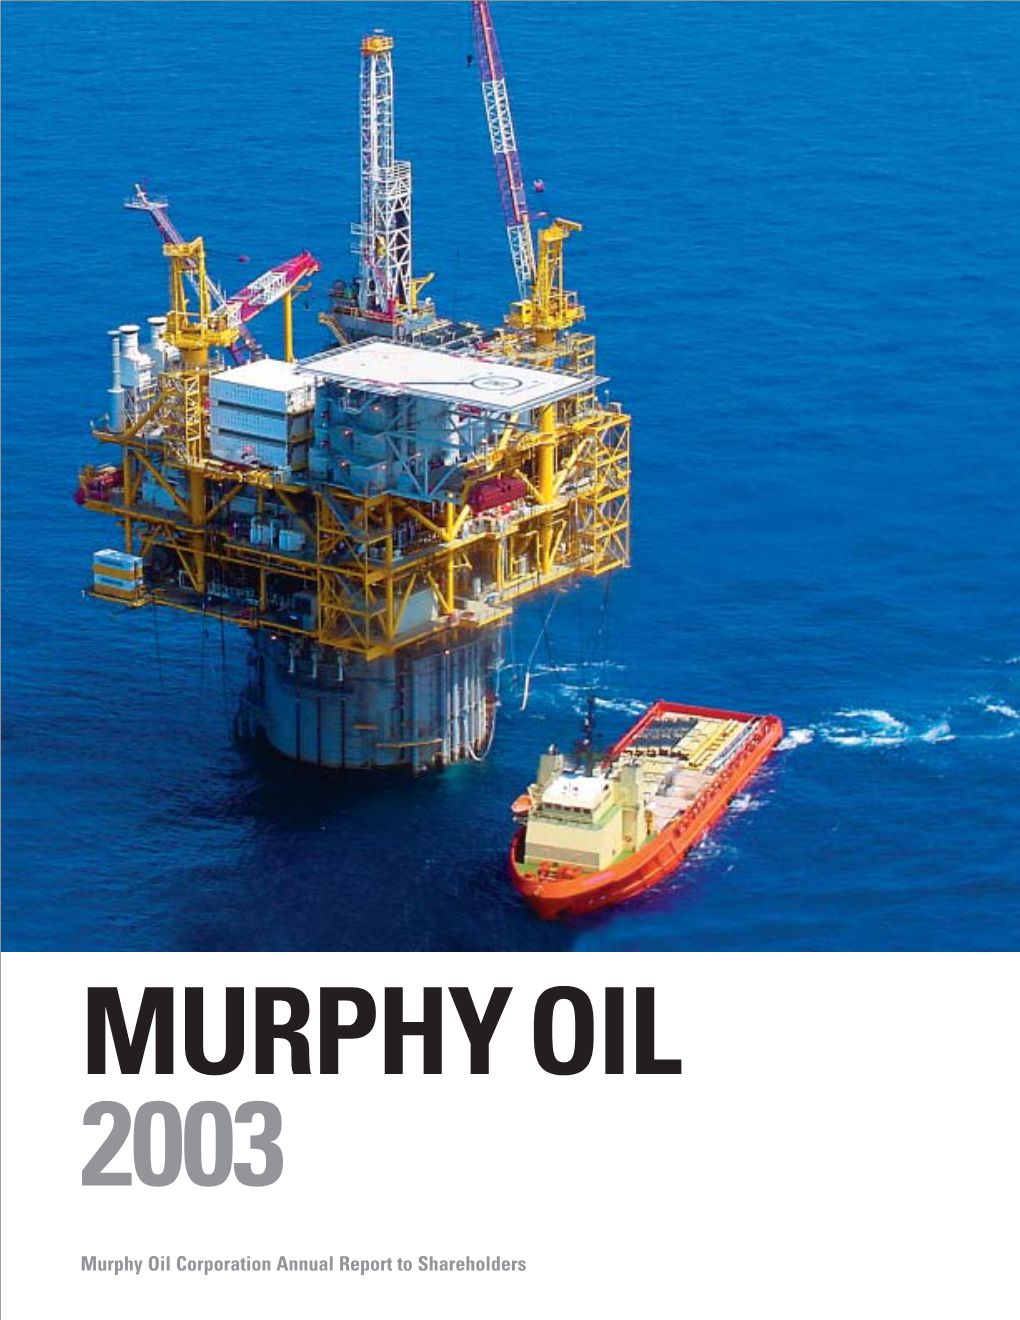 Murphy Oil Corporation Annual Report to Shareholders MURPHY OIL at a GLANCE